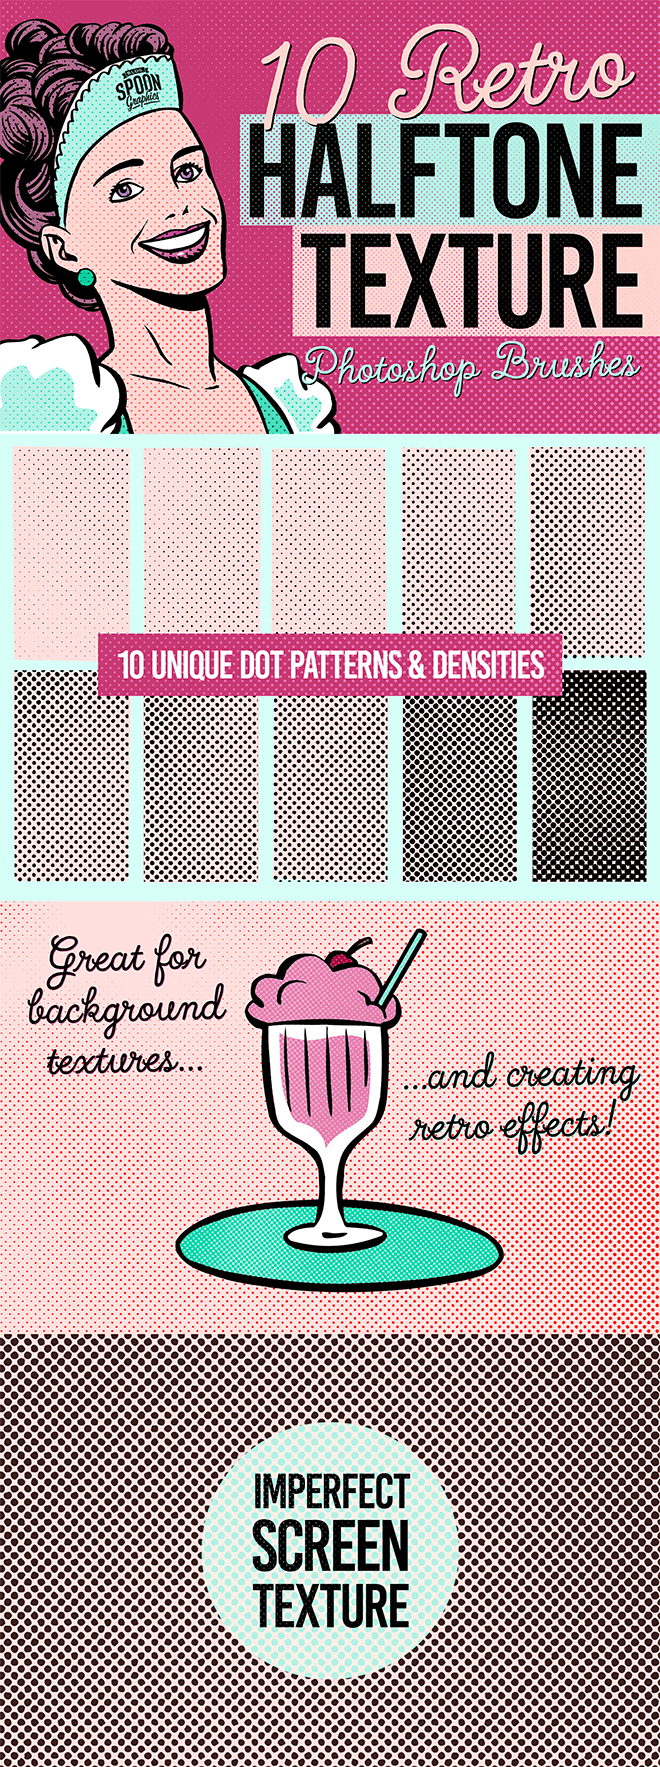 10 Halftone Texture Brushes for Adobe Photoshop